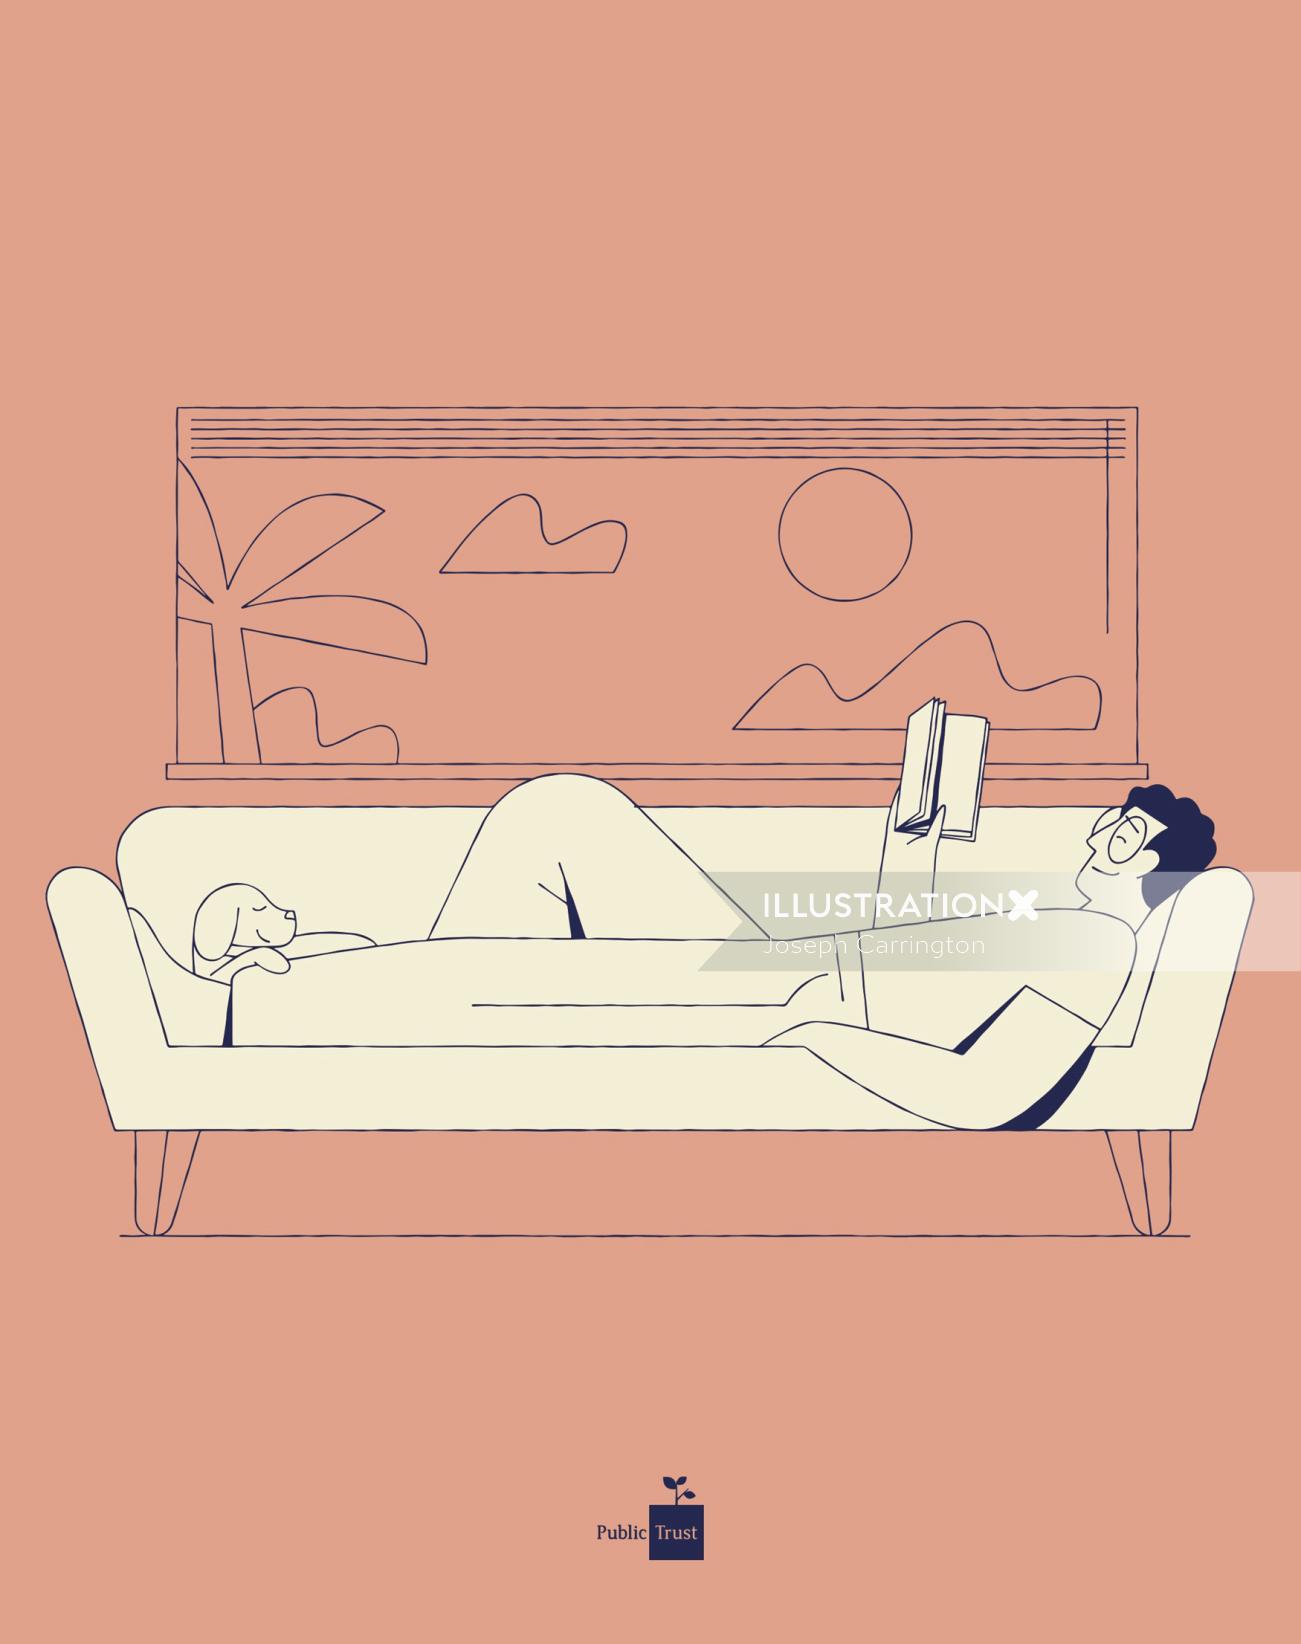 Graphic man sleeping on couch